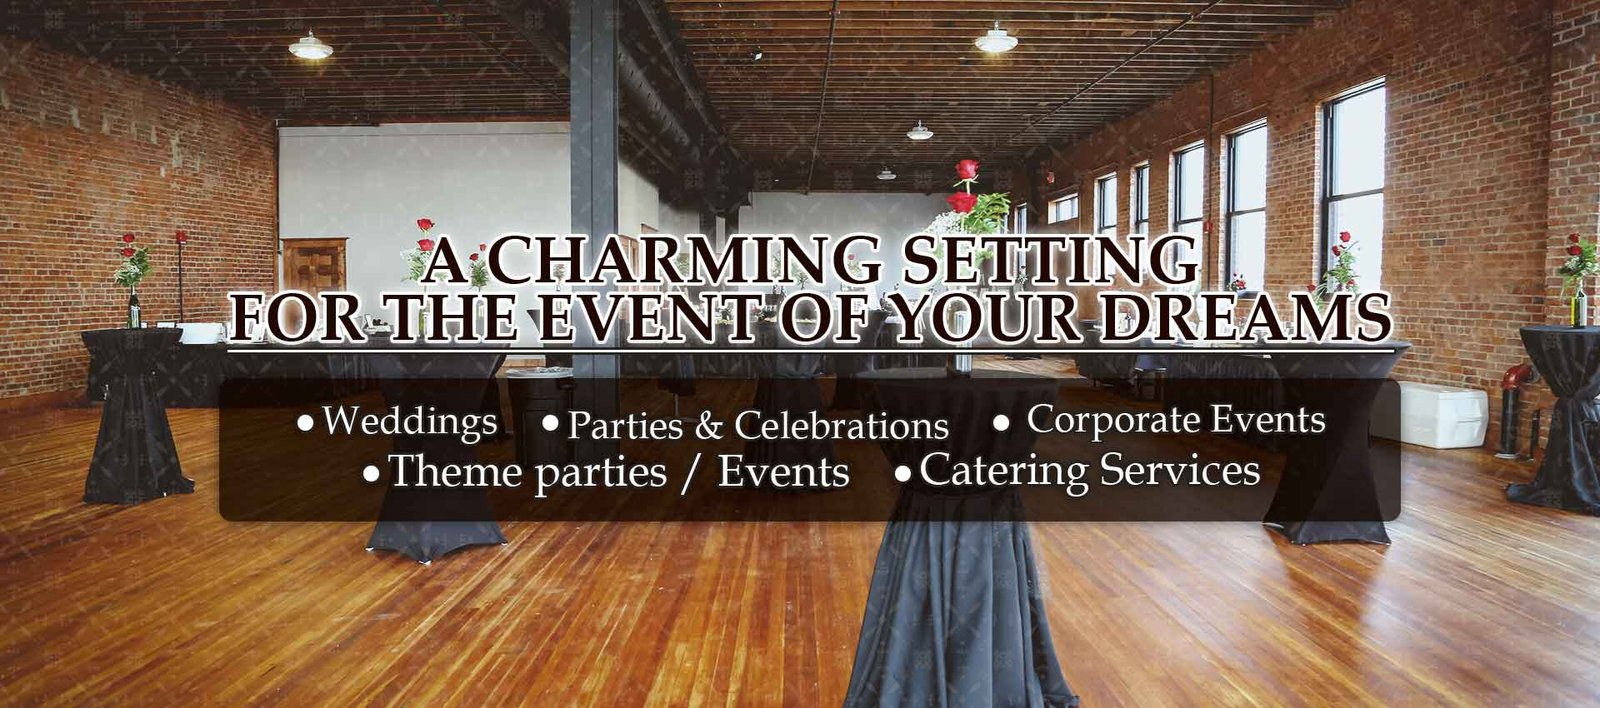 Event Venues with Catering in South East Nebraska